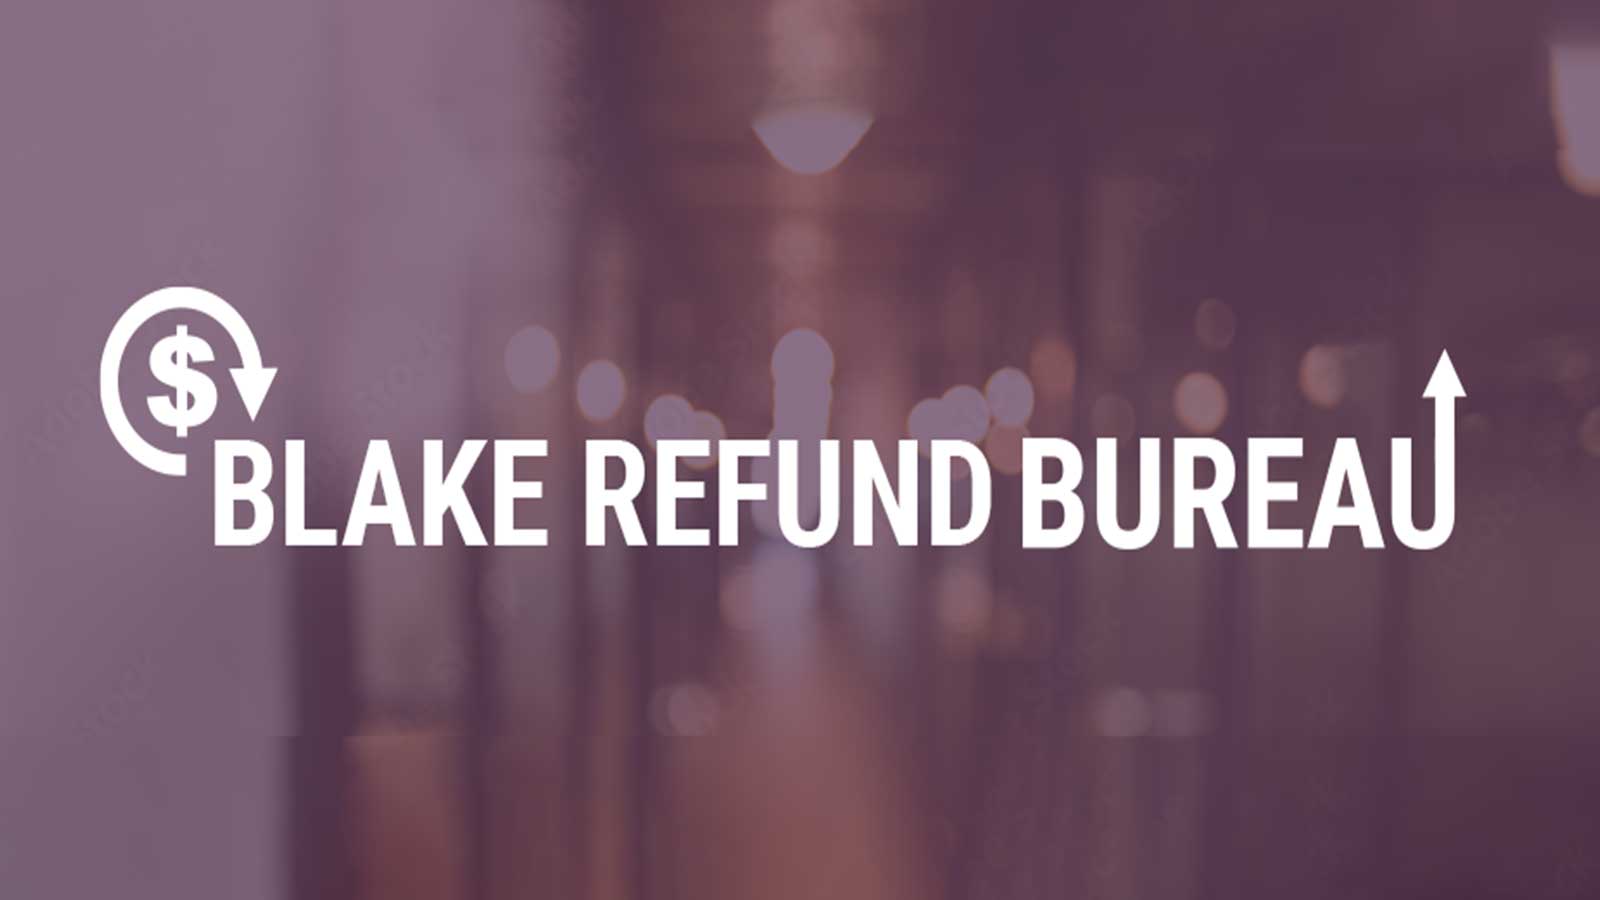 Blake Refund Bureau assists with refunds of court fines